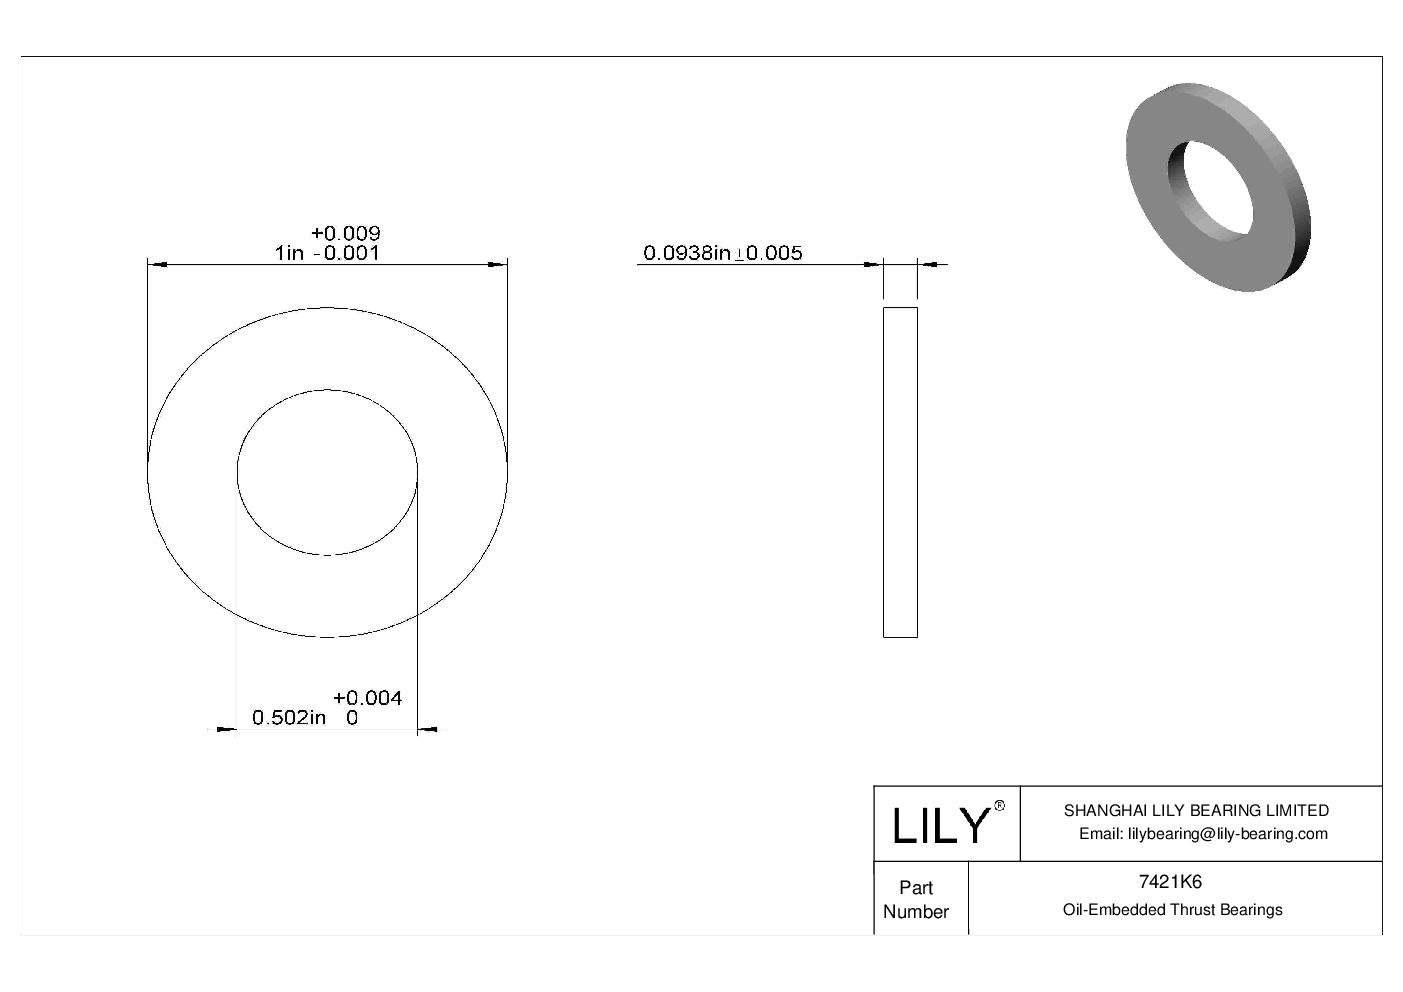 HECBKG Ultra-Low-Friction Oil-Embedded Thrust Bearings cad drawing